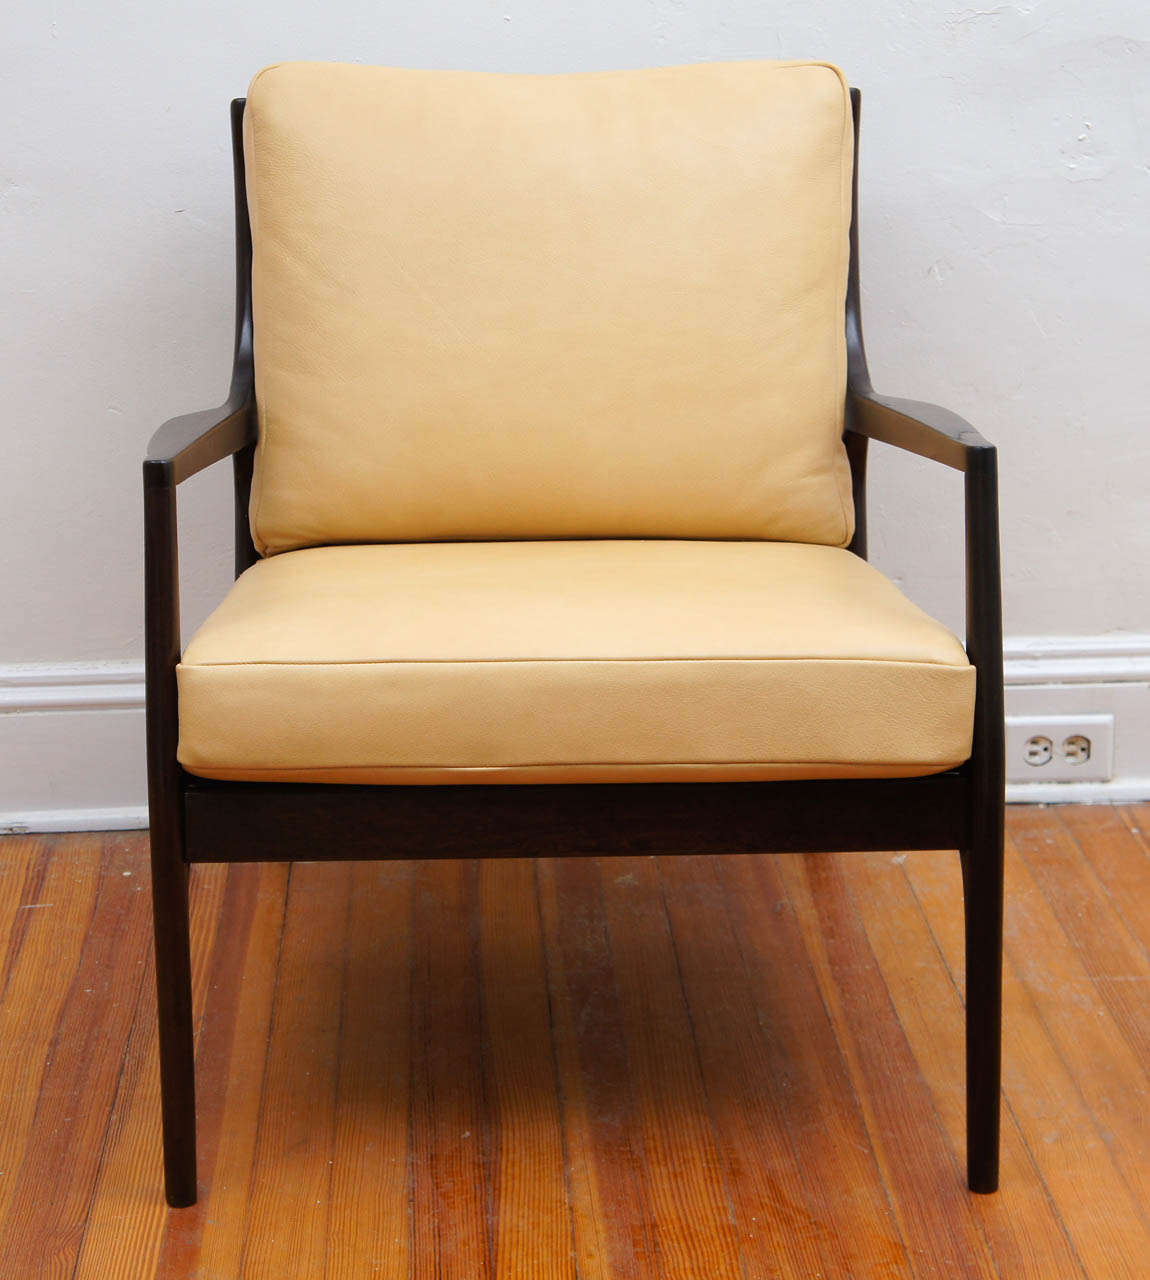 a wonderful pair of mid century armchairs.
A Danish style with a modern flair. The lines are really great the way the rear legs kick back.
A recent update was done with a darker stain. Chairs in pics have been sold, however  we have 2 identical